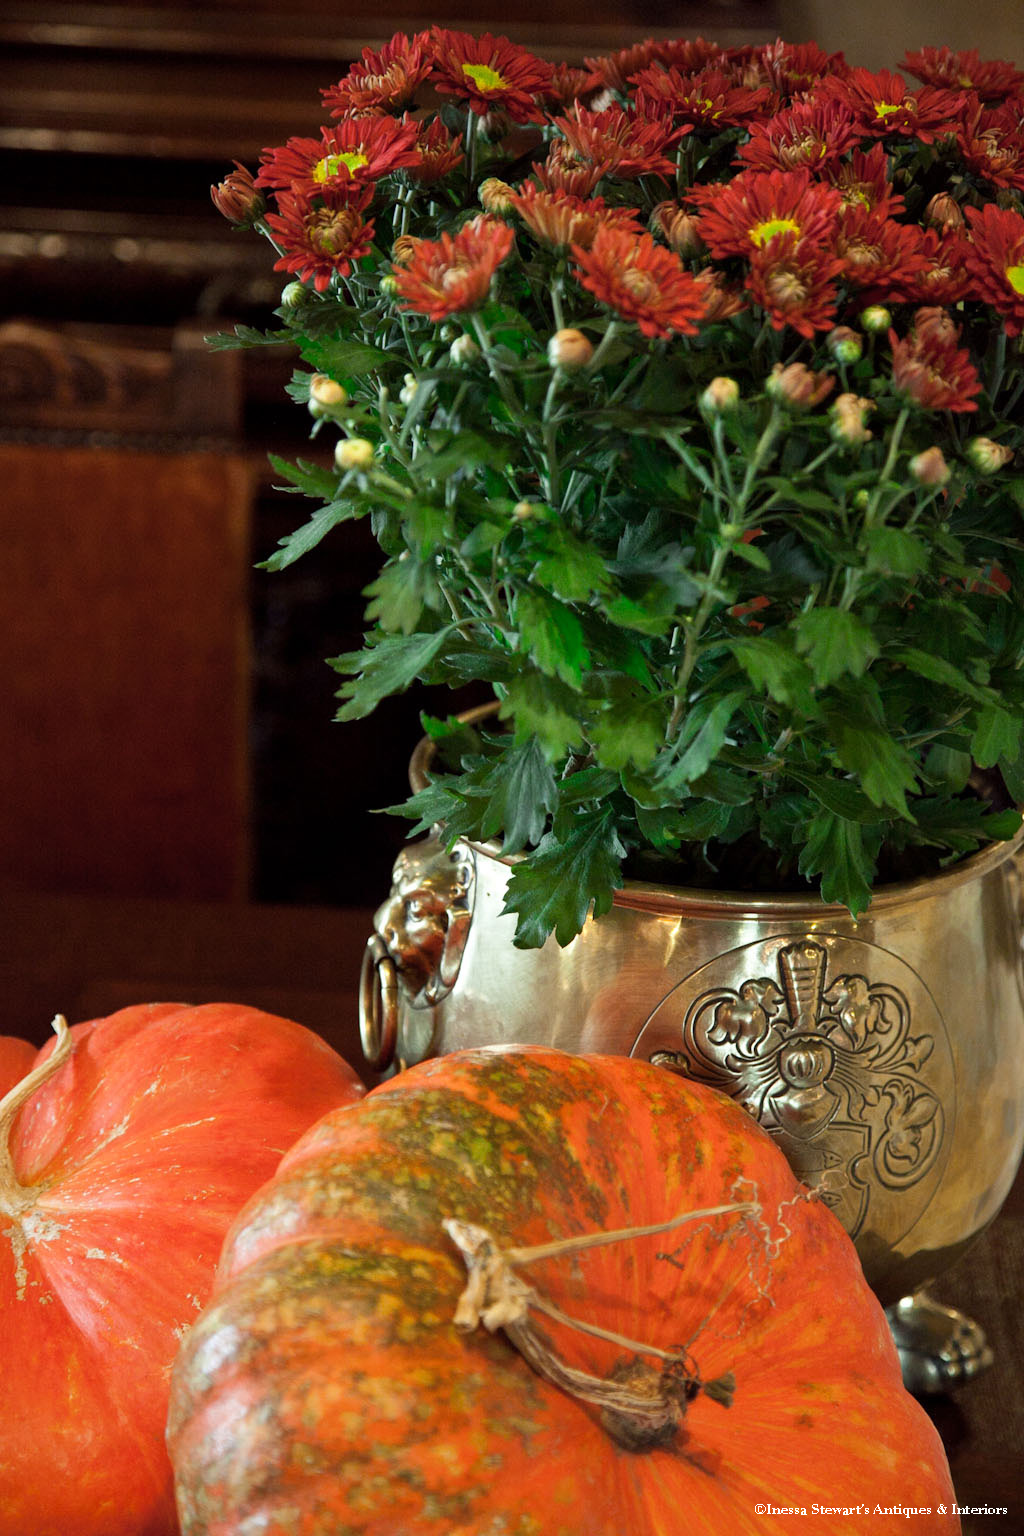 French Antique Planter, Pumpkins, and Flowers